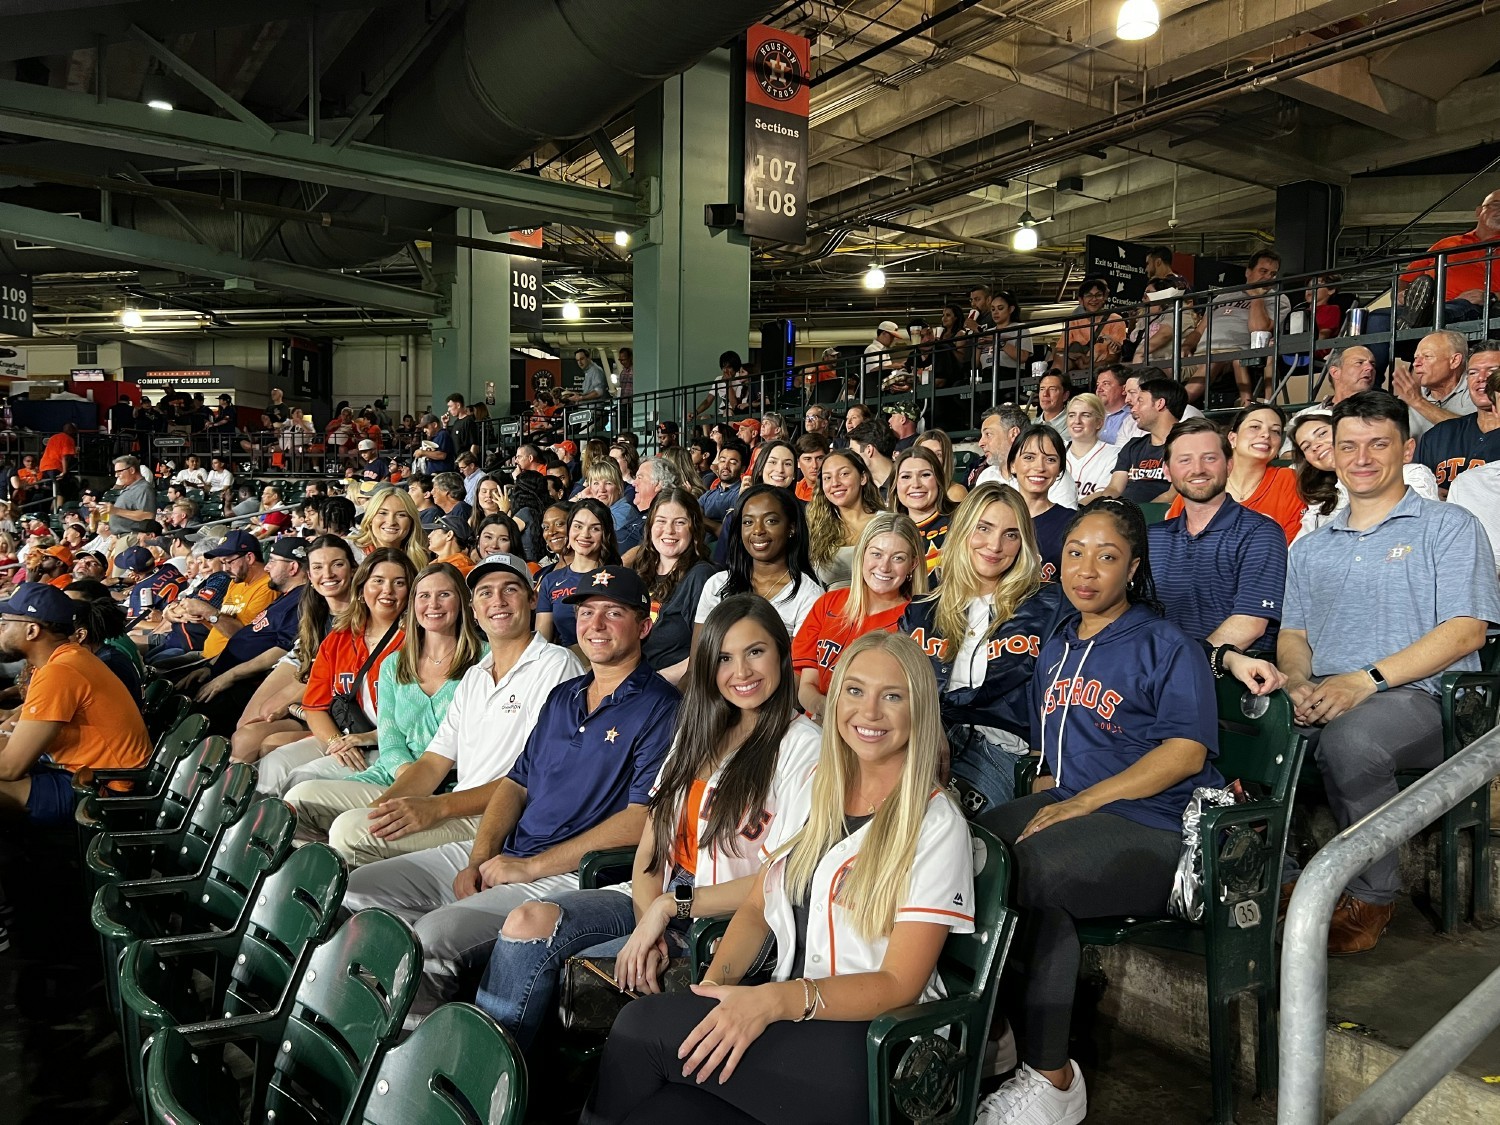 Transwestern Young Professionals group enjoys an evening at the Astros!